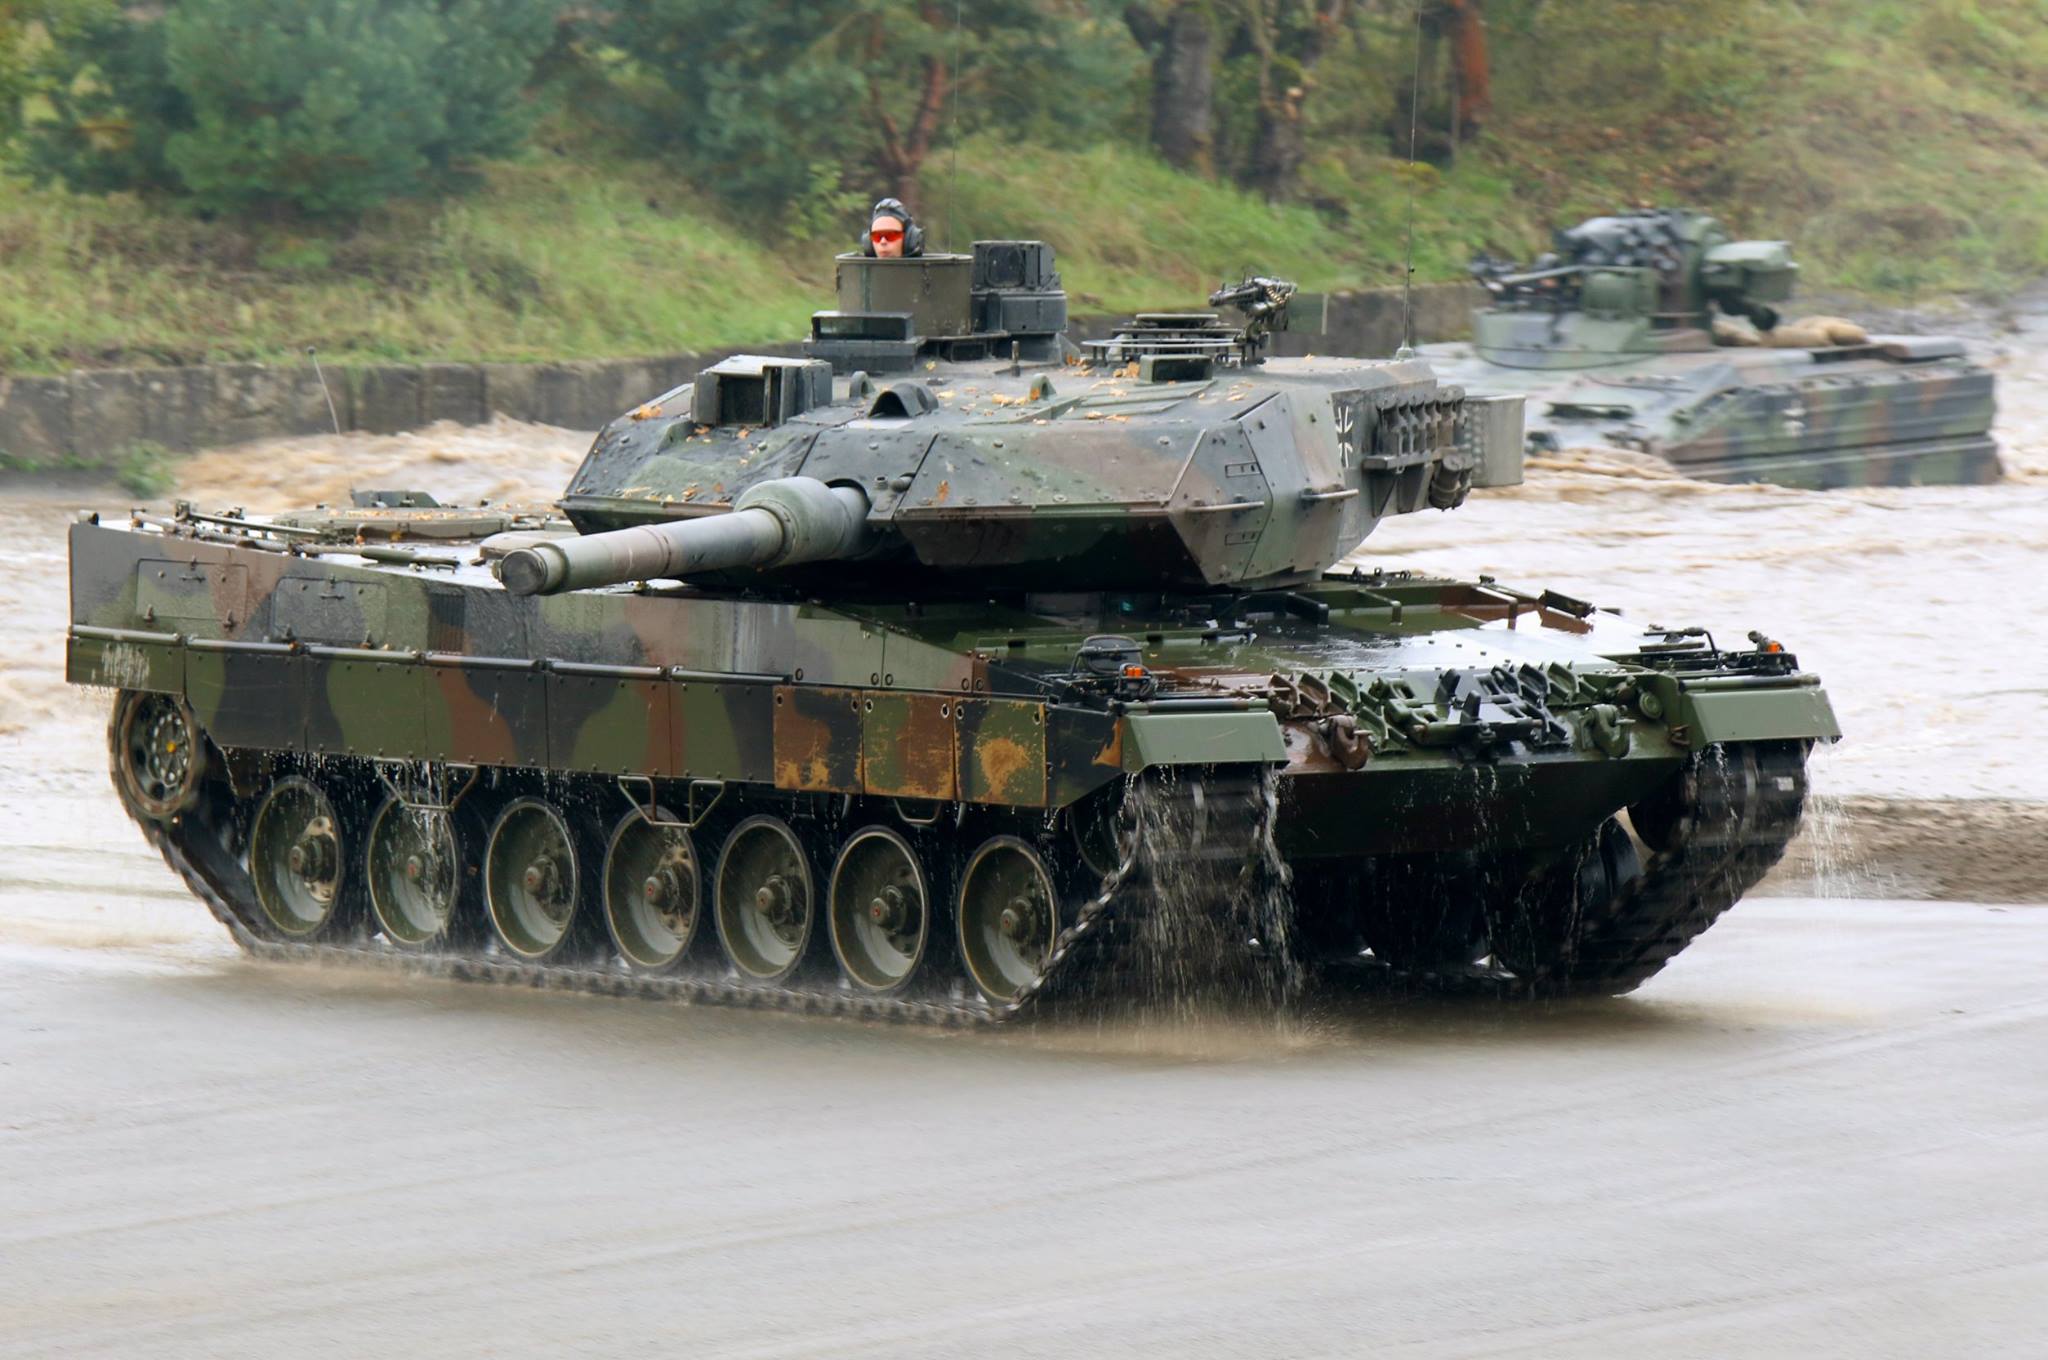 More than half of the German's Leopard 2 main battle tanks are